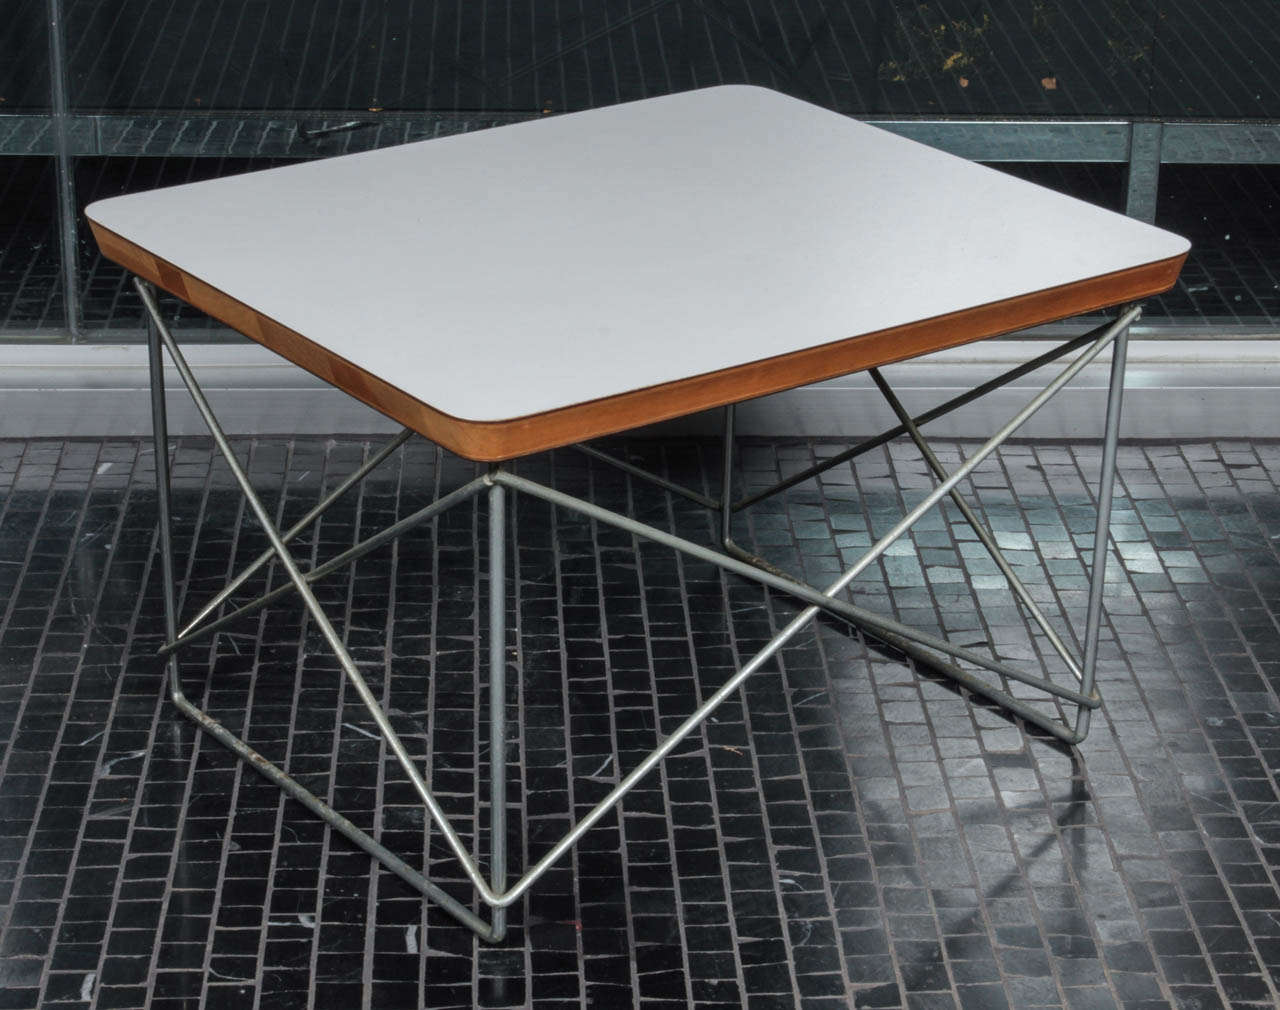 Eames LTR (Low Table Rod) made in the 1950′s. It has a white laminate top with a Herman Miller label underneath and a zinc base.